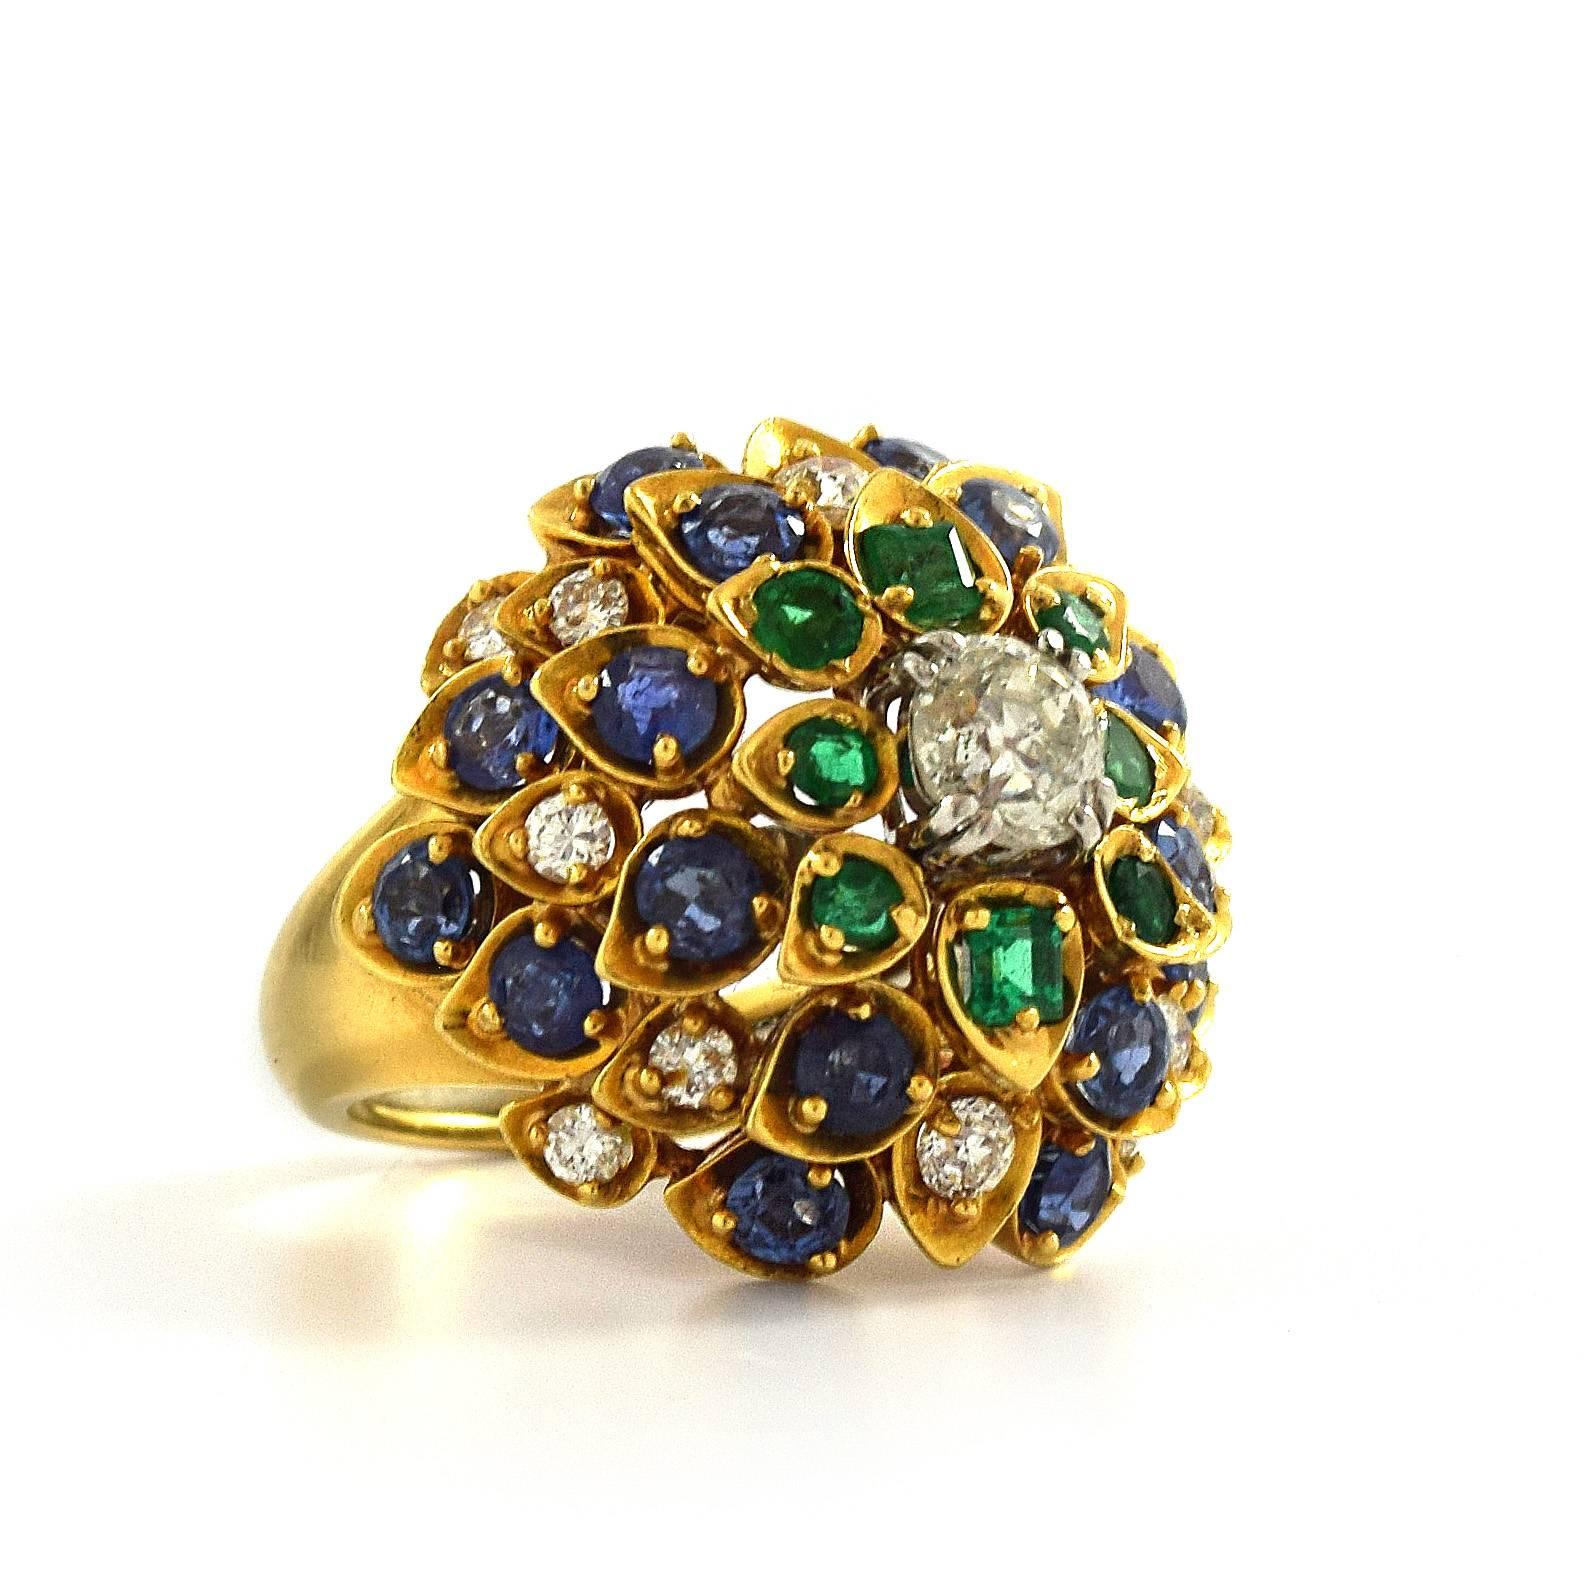 Women's or Men's David Webb Cluster Ring with Diamonds, Sapphire and Emeralds